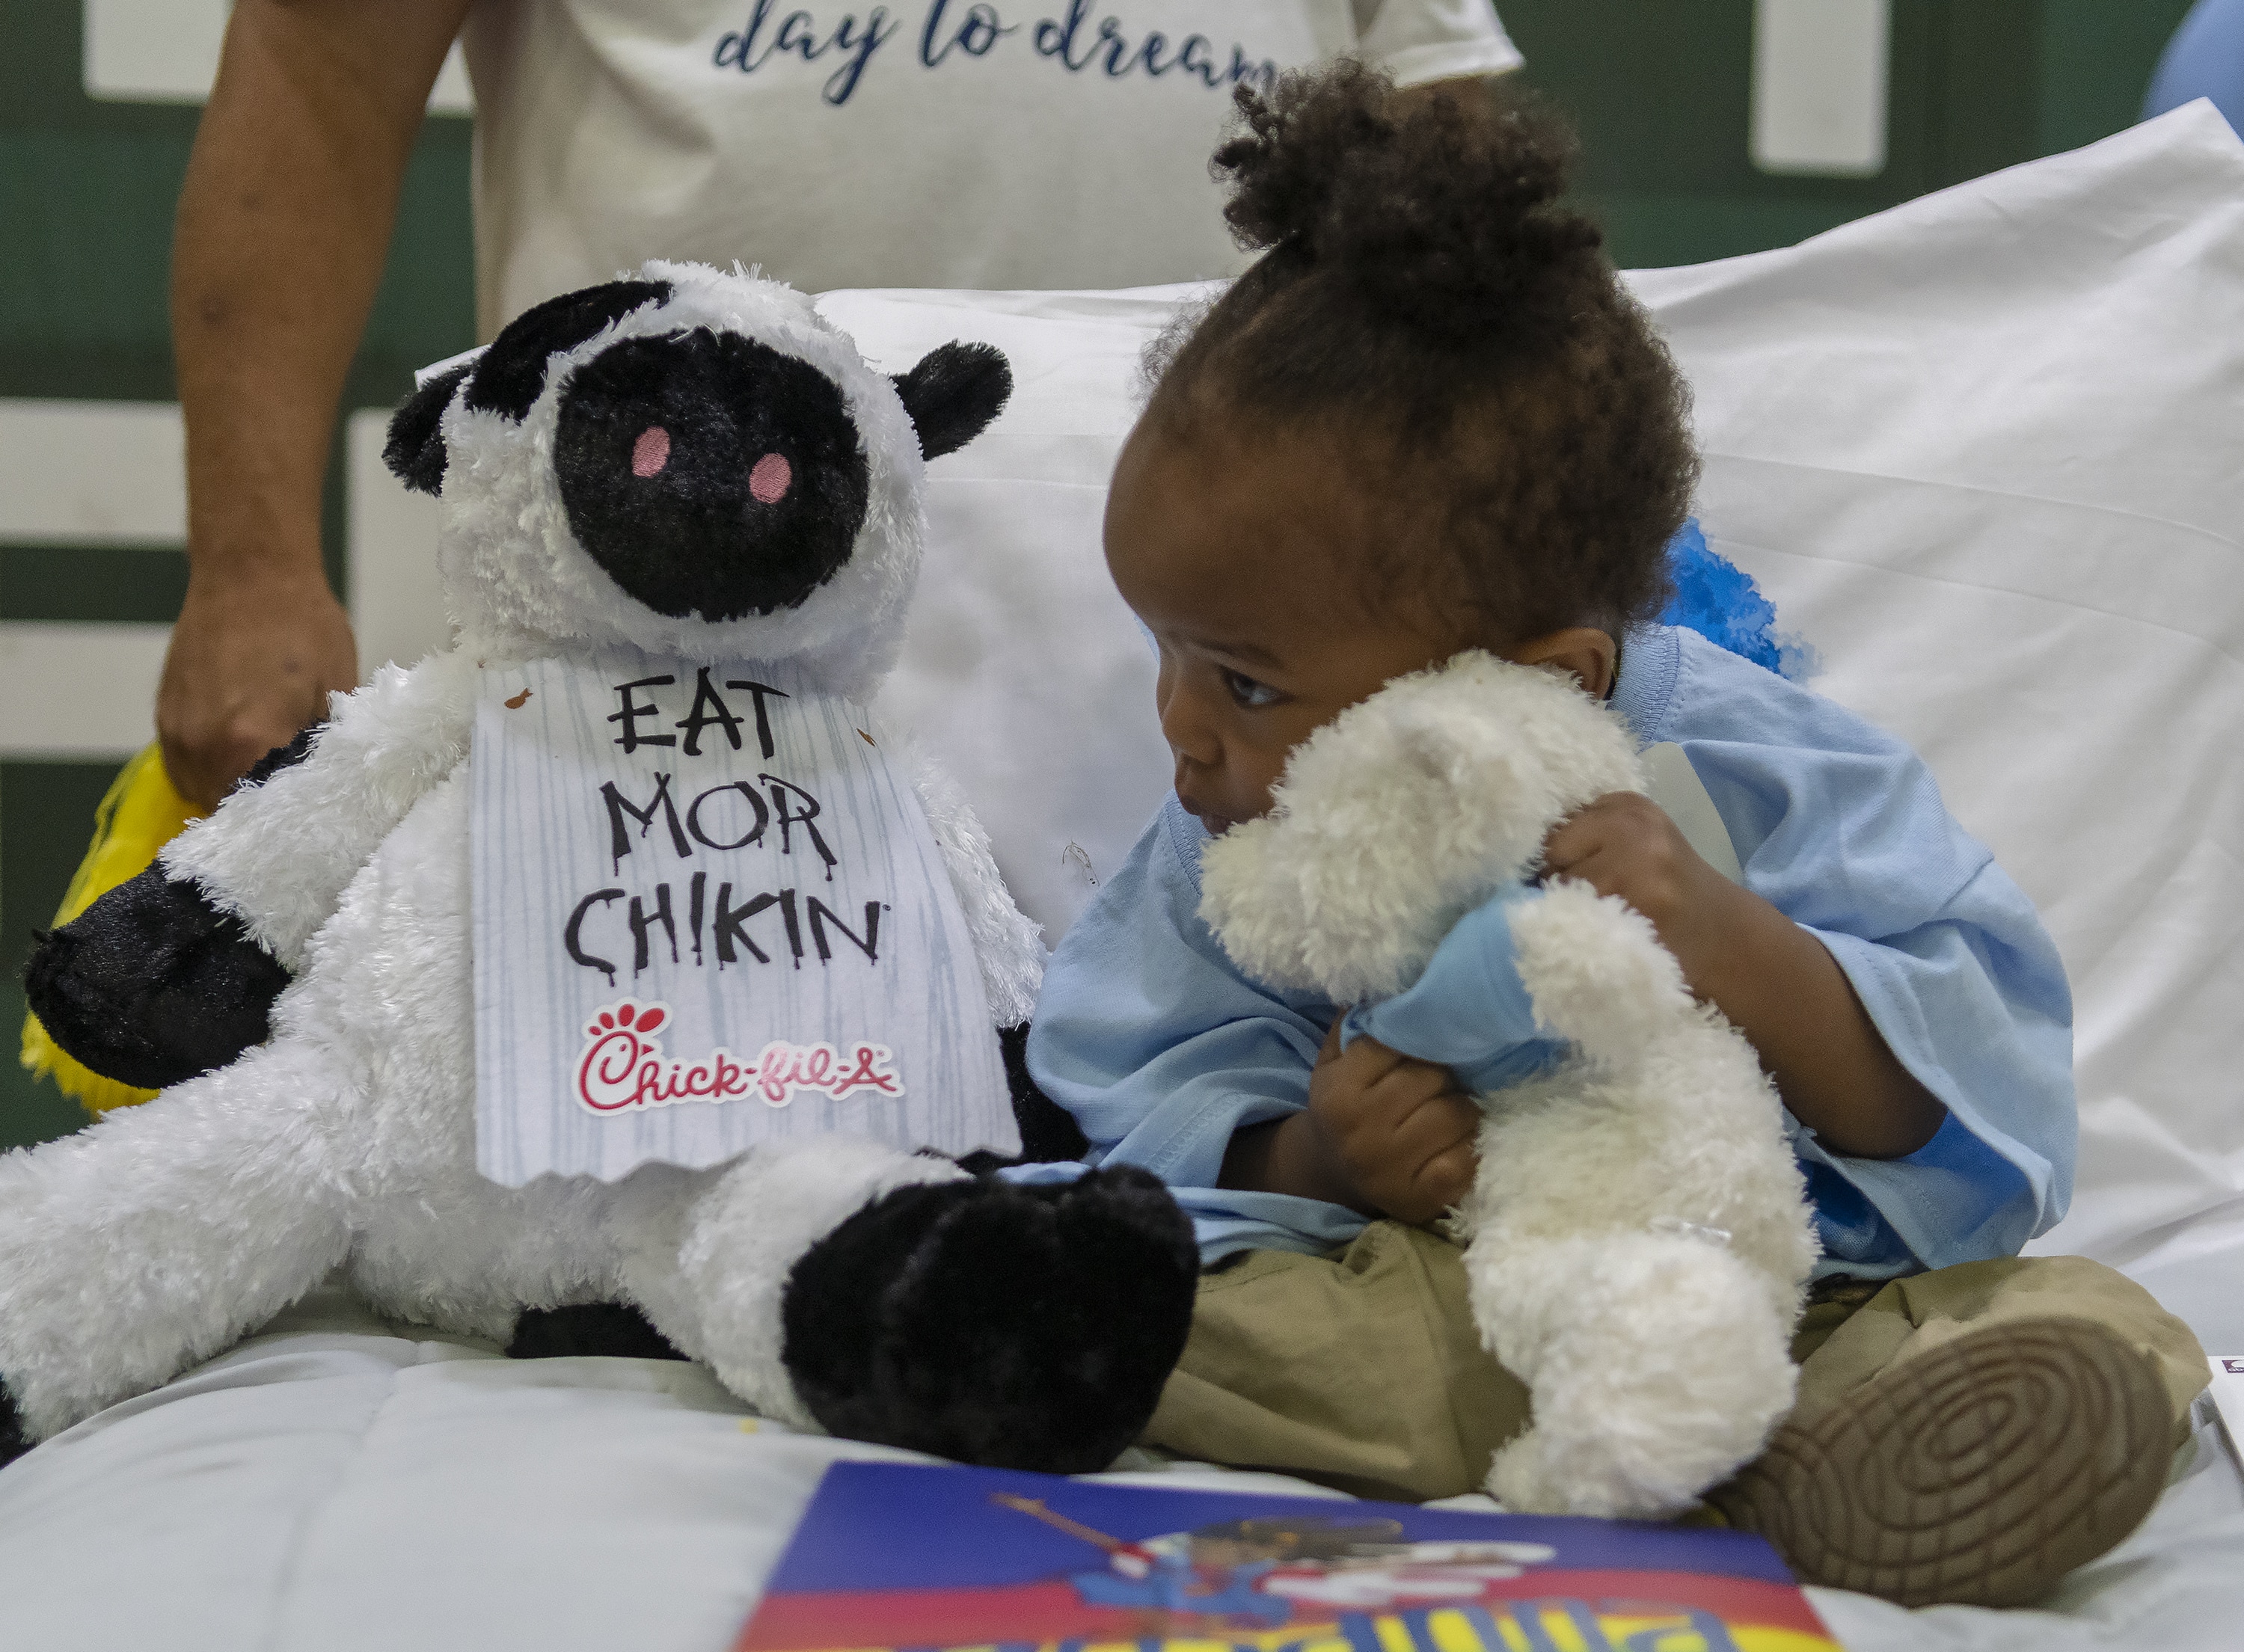 “Day To Dream” Event Offers Children In Need A Good Night’s Sleep